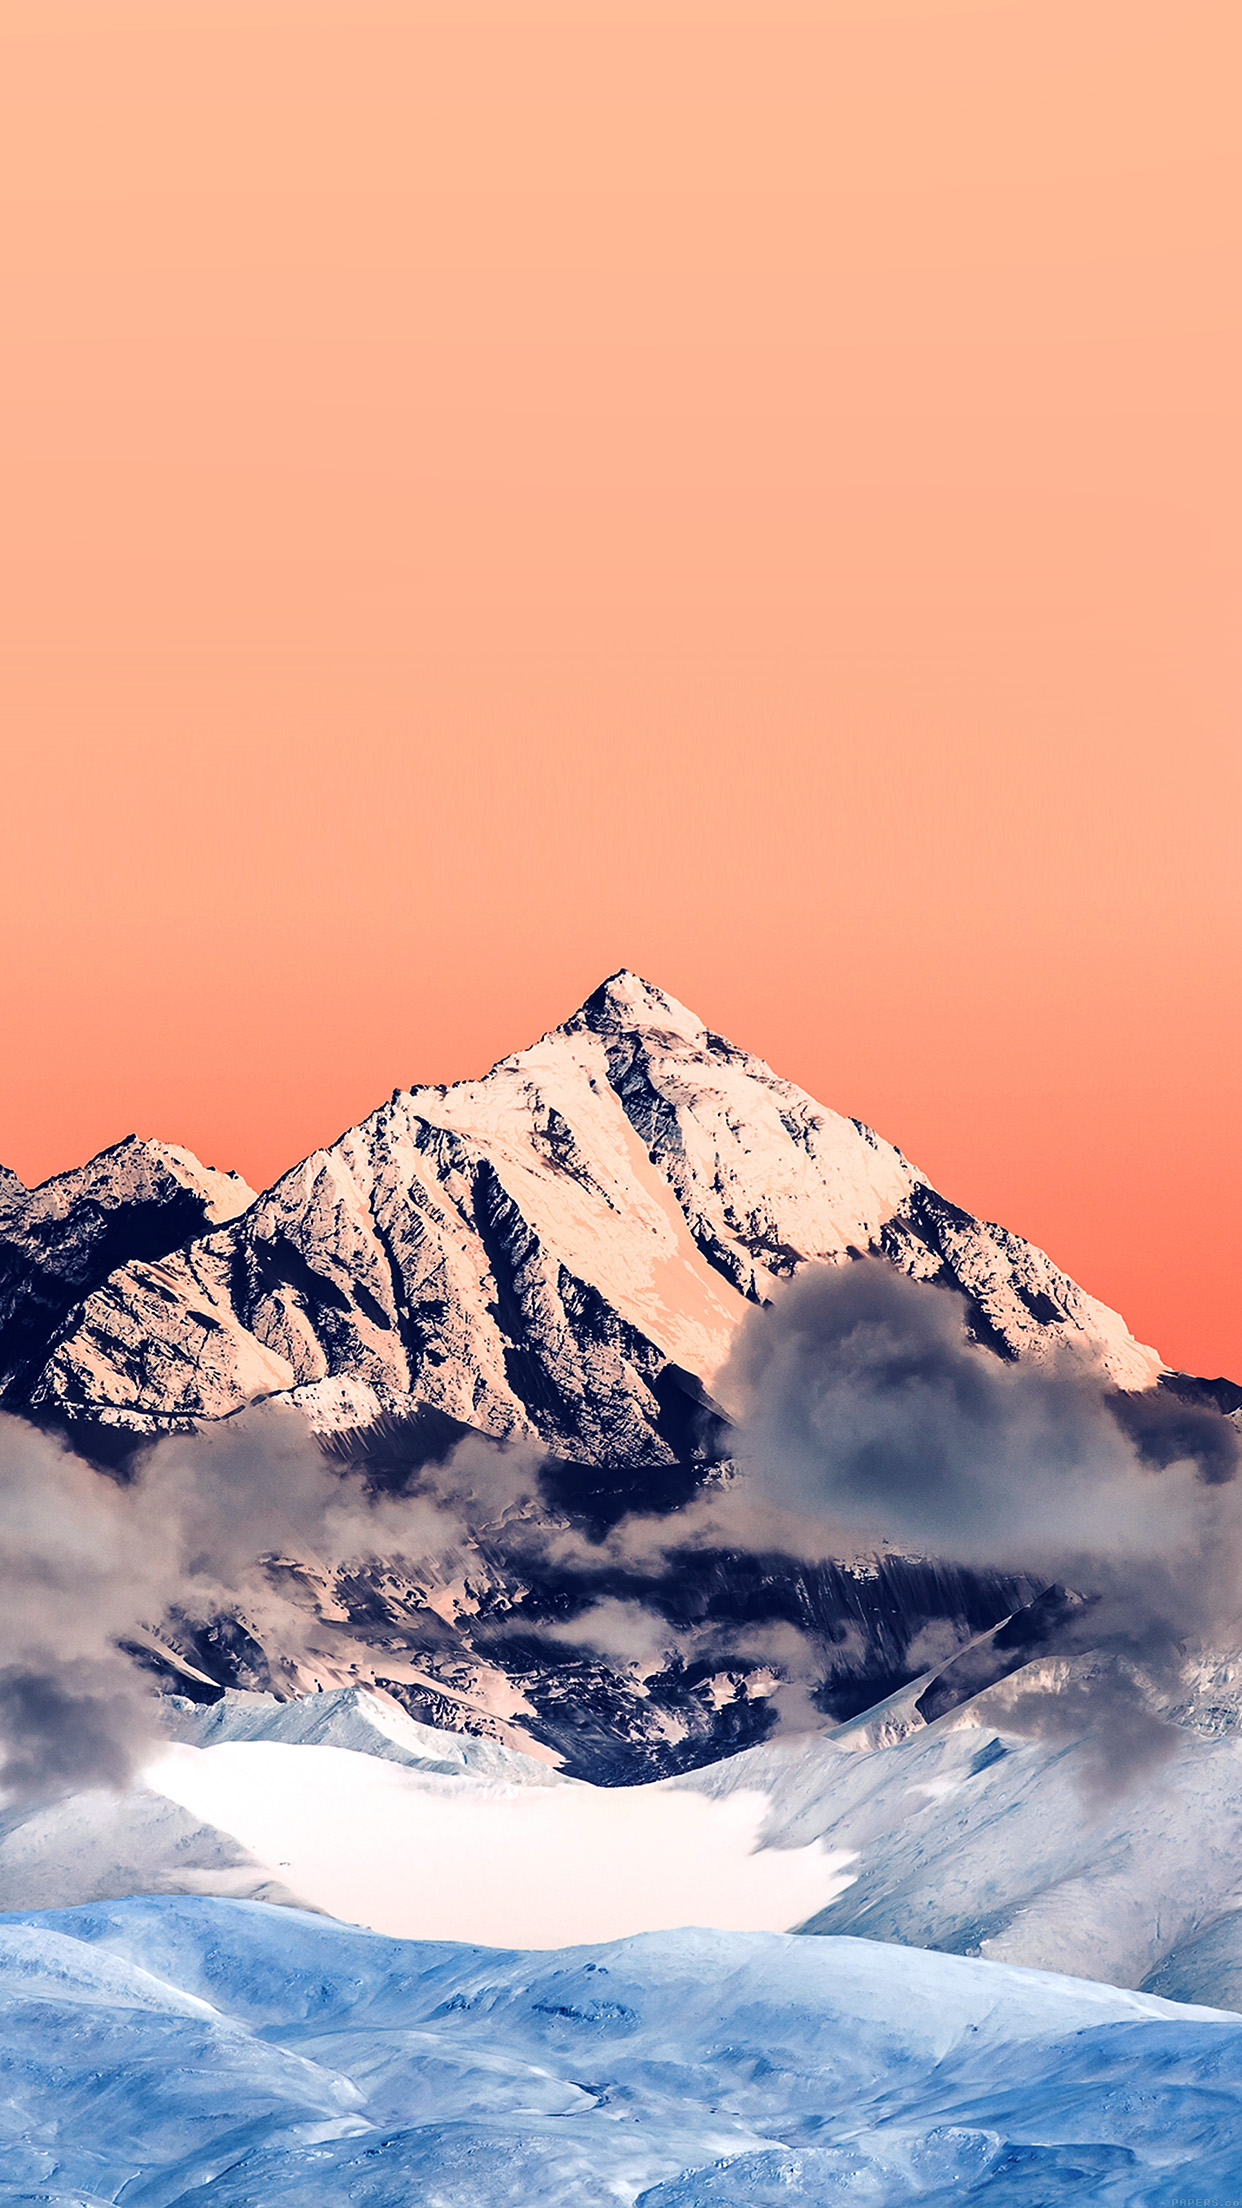 Snow Solo Orange Mountain High Nature Android wallpaper